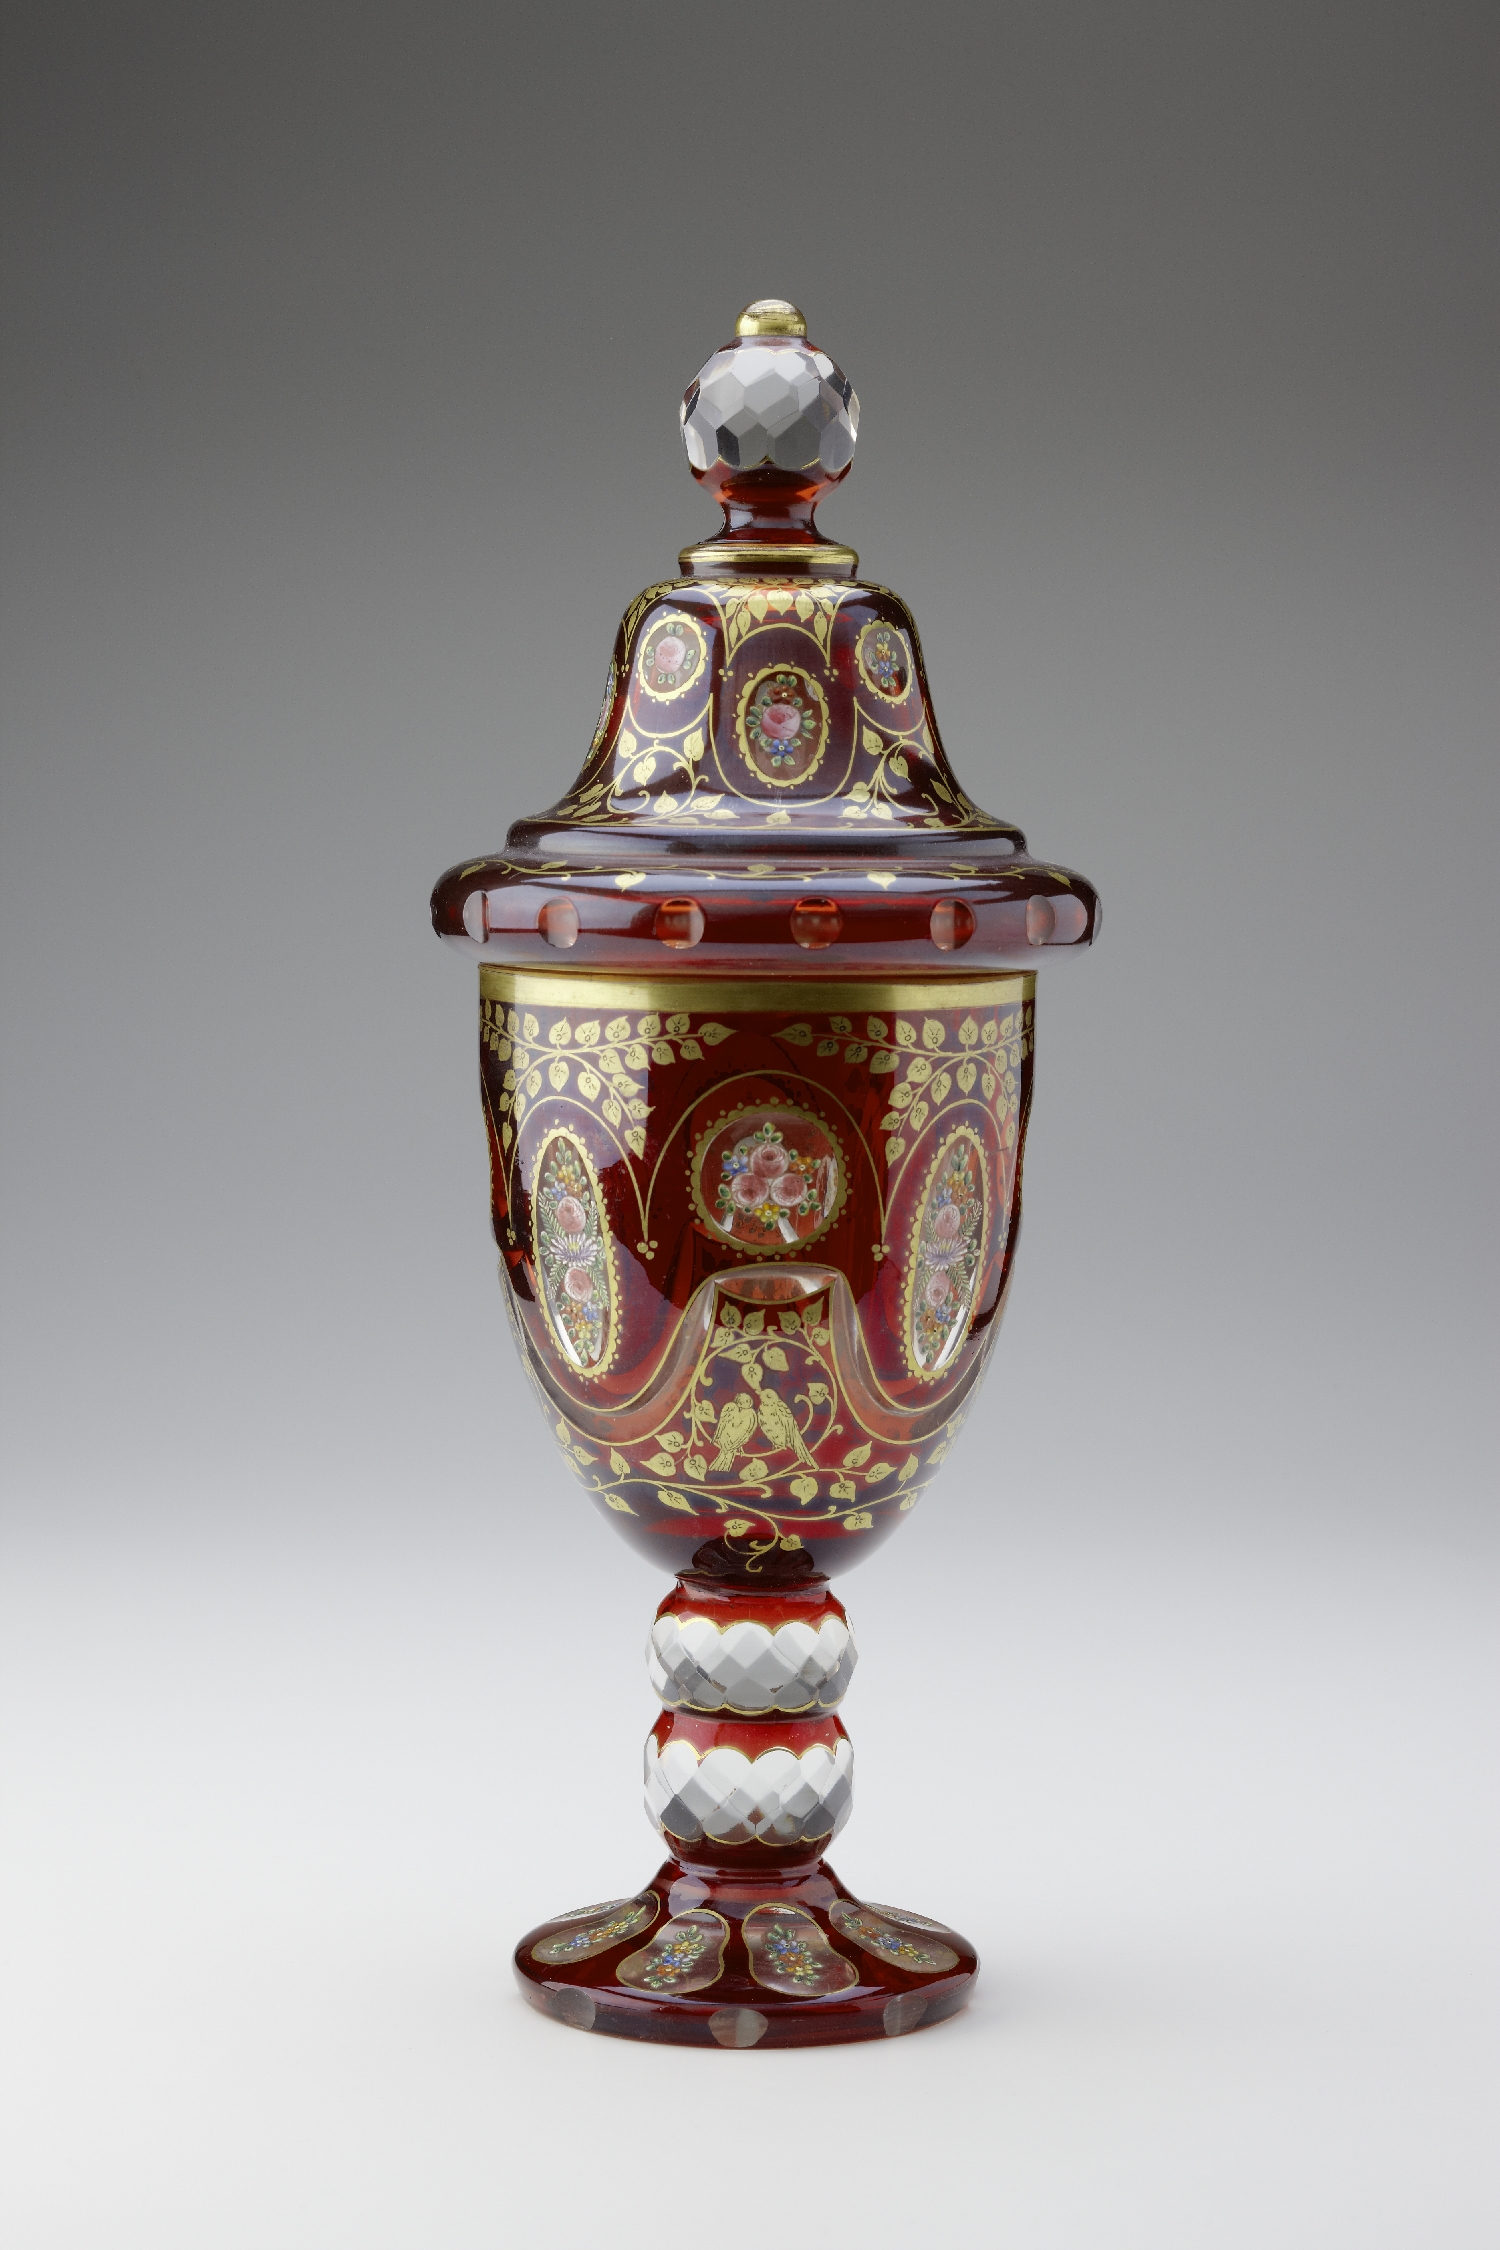 Covered goblet, Bohemia, mid-19th c., glass, stained, cut, painted, inv. no. 2400-2010